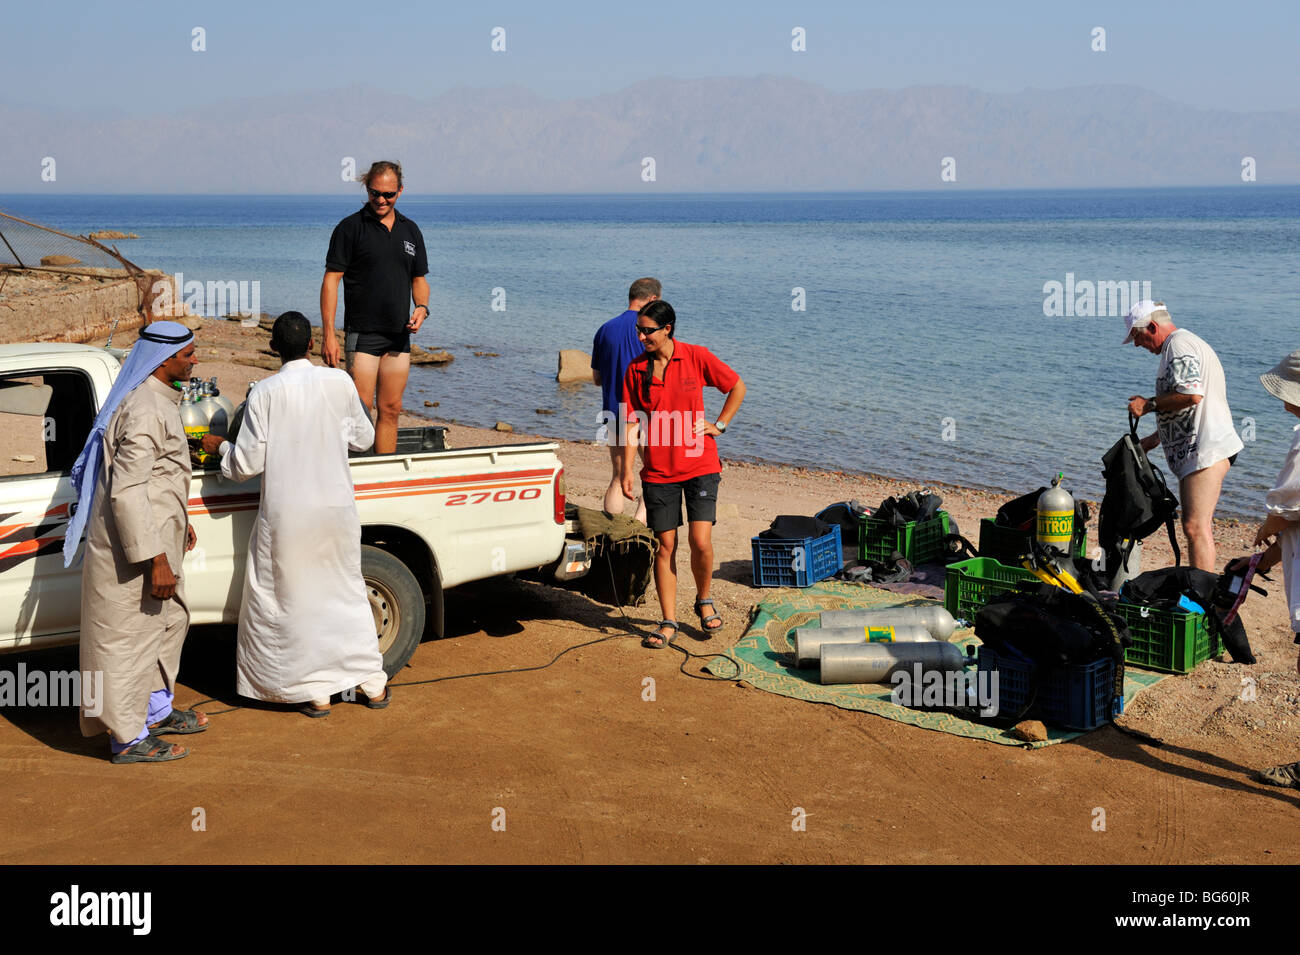 Scuba divers on expedition organizing for a shore dive Ras Abu Ghalum National Park, Sinai, 'Red Sea', Egypt Stock Photo